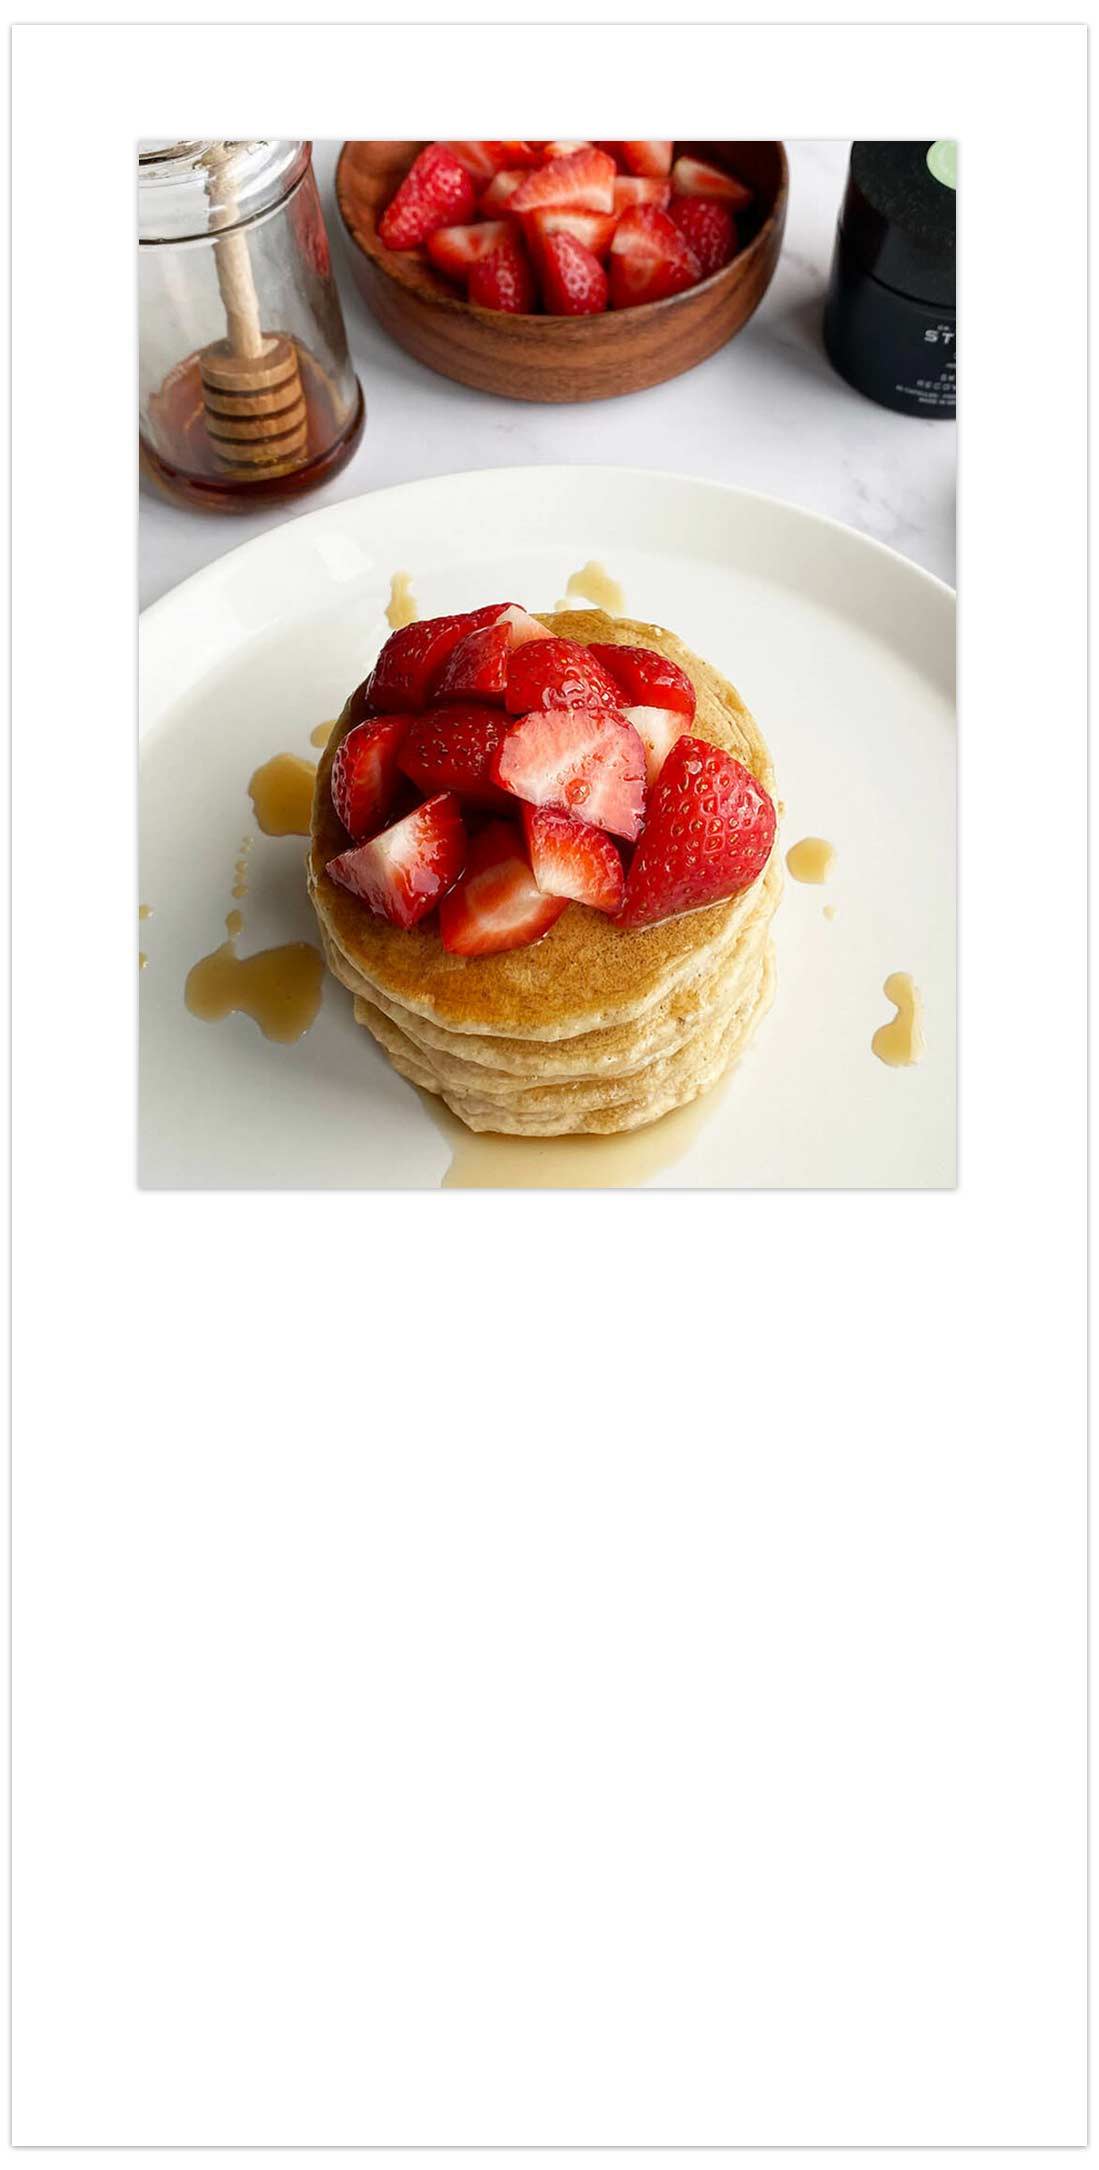 PANCAKES WITH STRAWBERRIES ON TOP